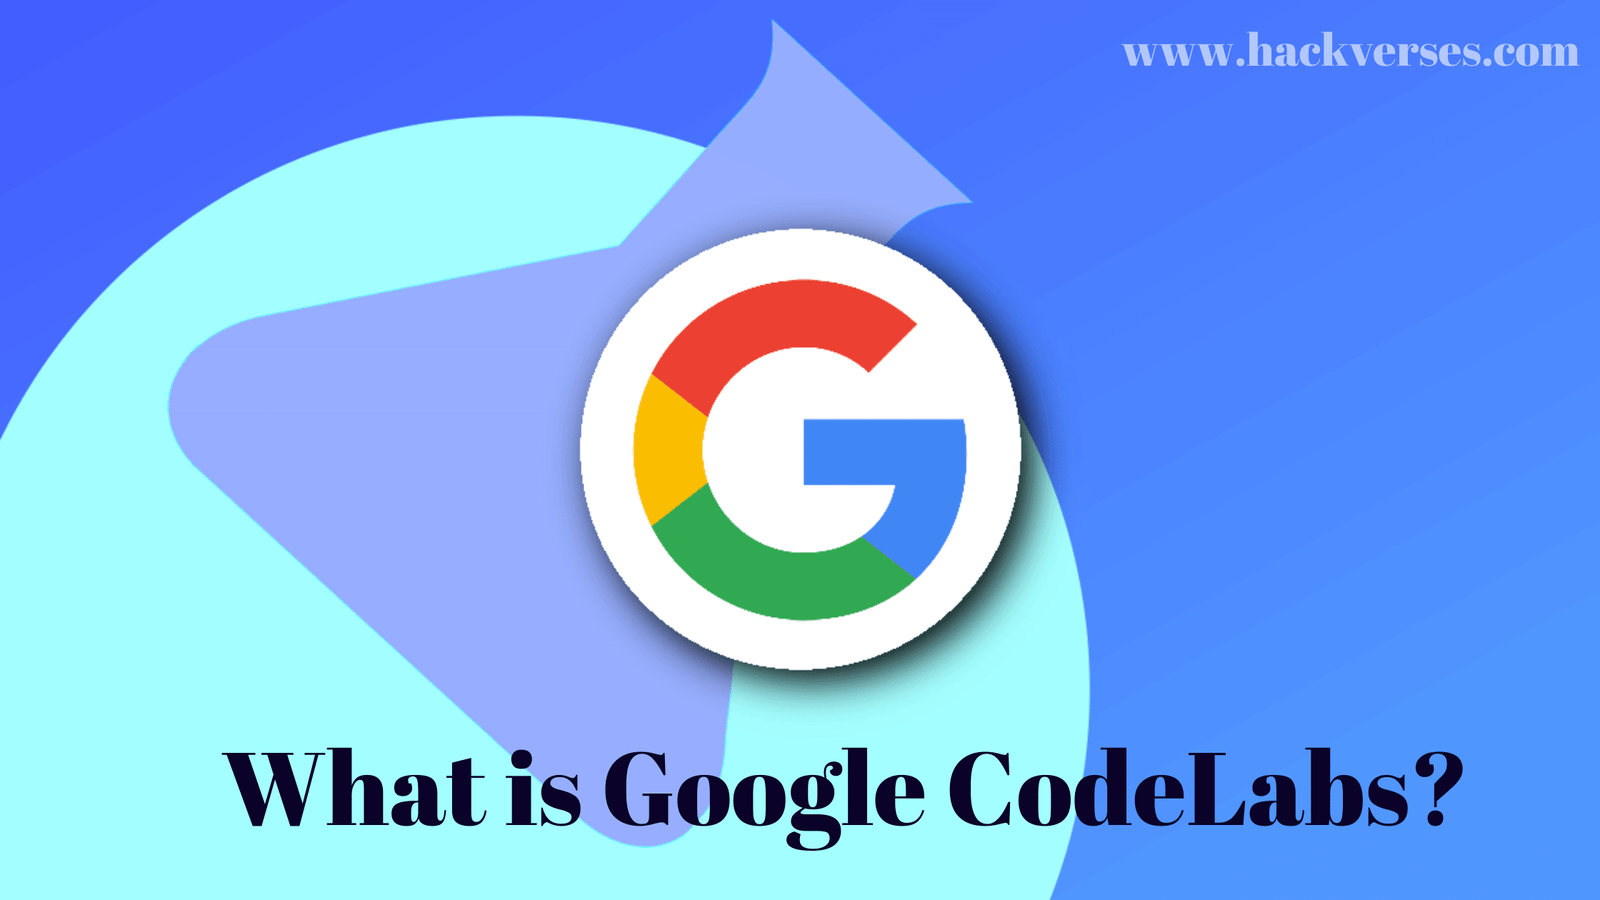 What is Google CodeLabs and How to Get Admission?